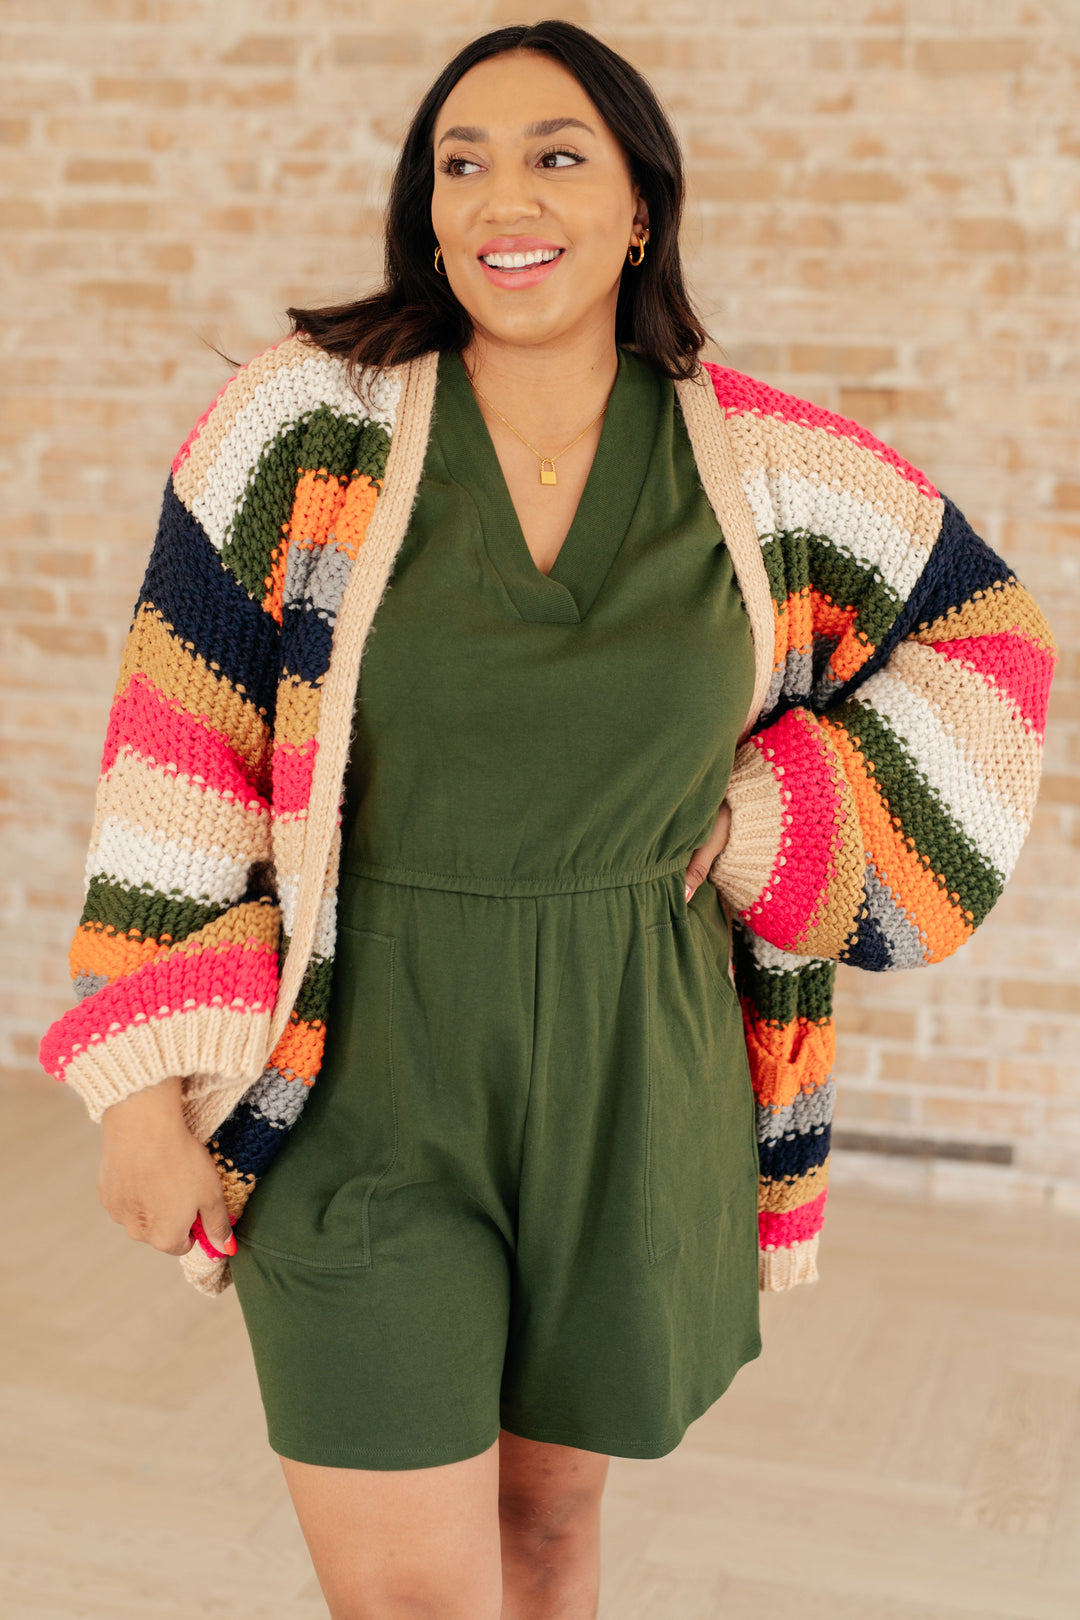 Life in Technicolor Knit Cardigan-Cardigans + Kimonos-Inspired by Justeen-Women's Clothing Boutique in Chicago, Illinois